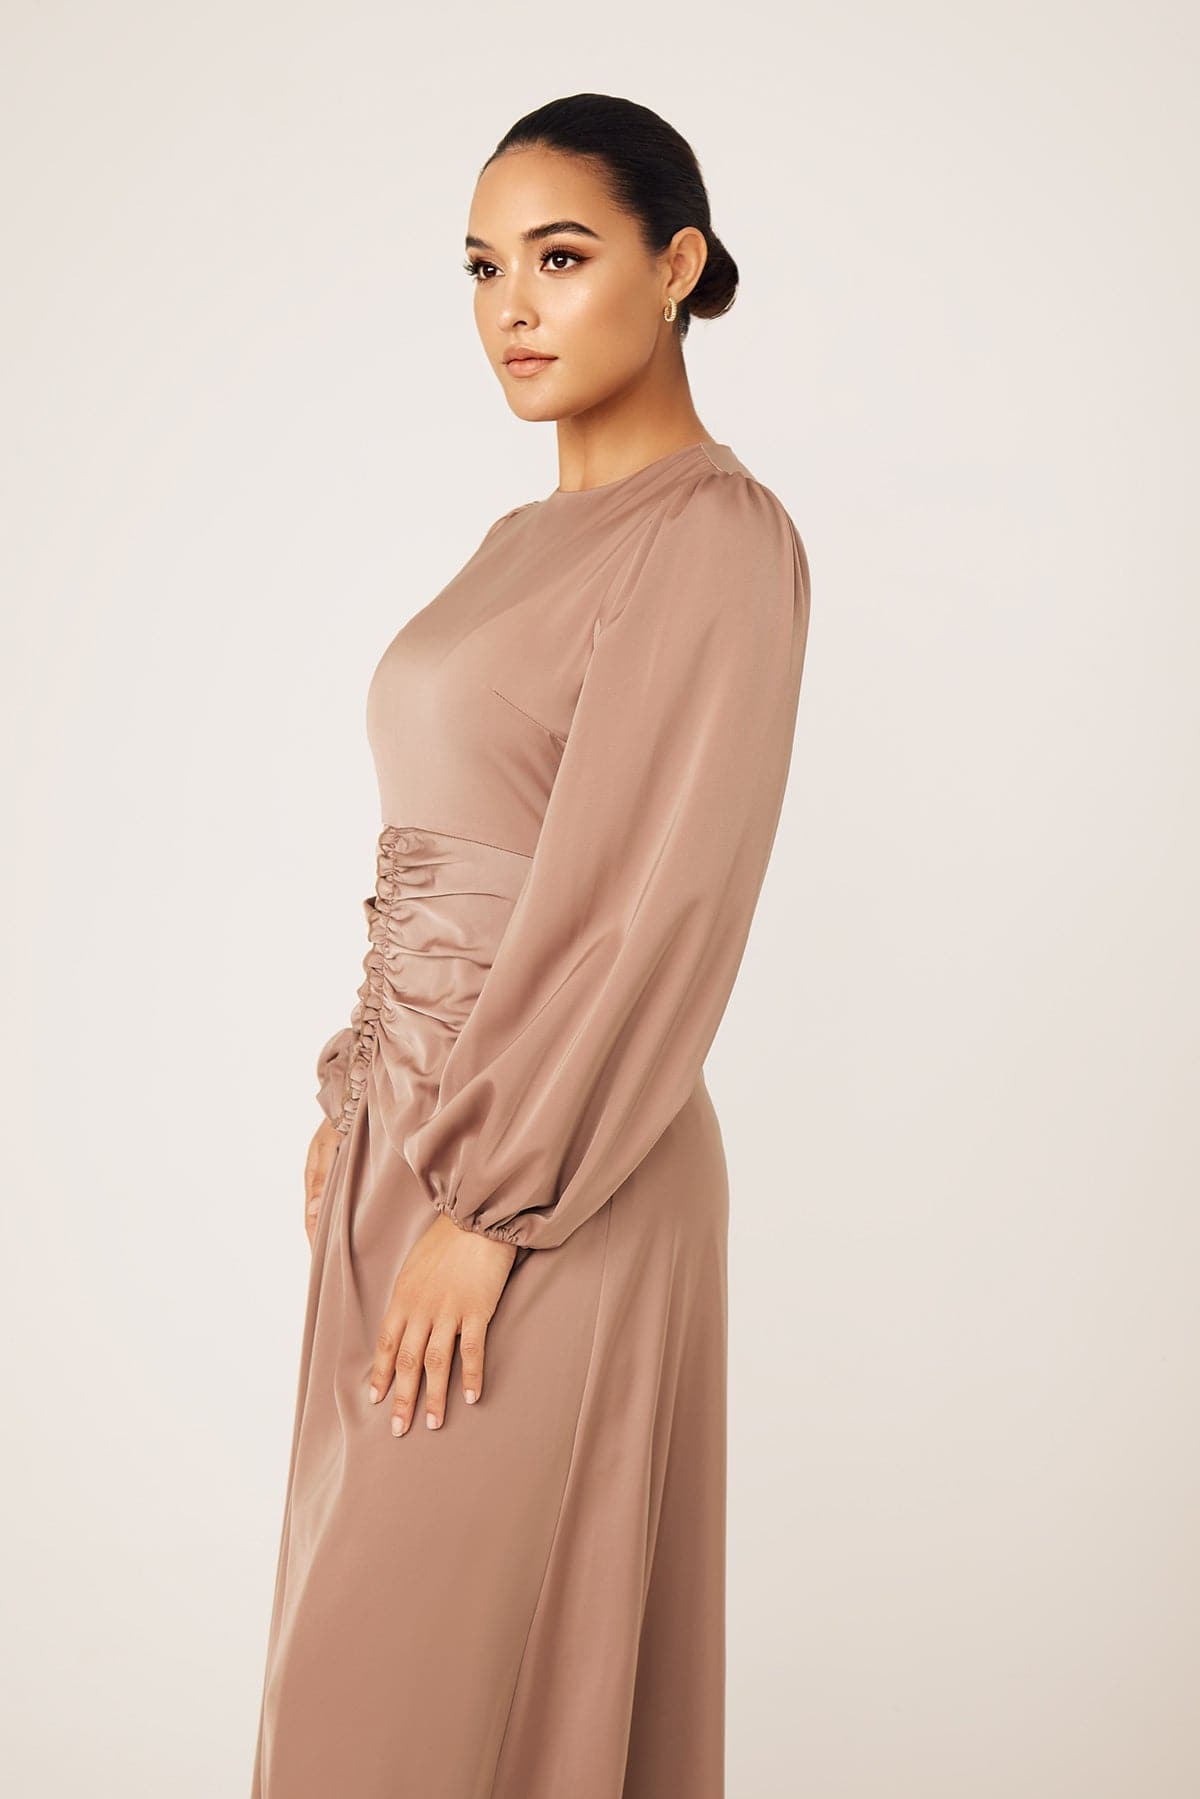 Yvonne Ruched Maxi Dress- Sand - Zahraa The Label